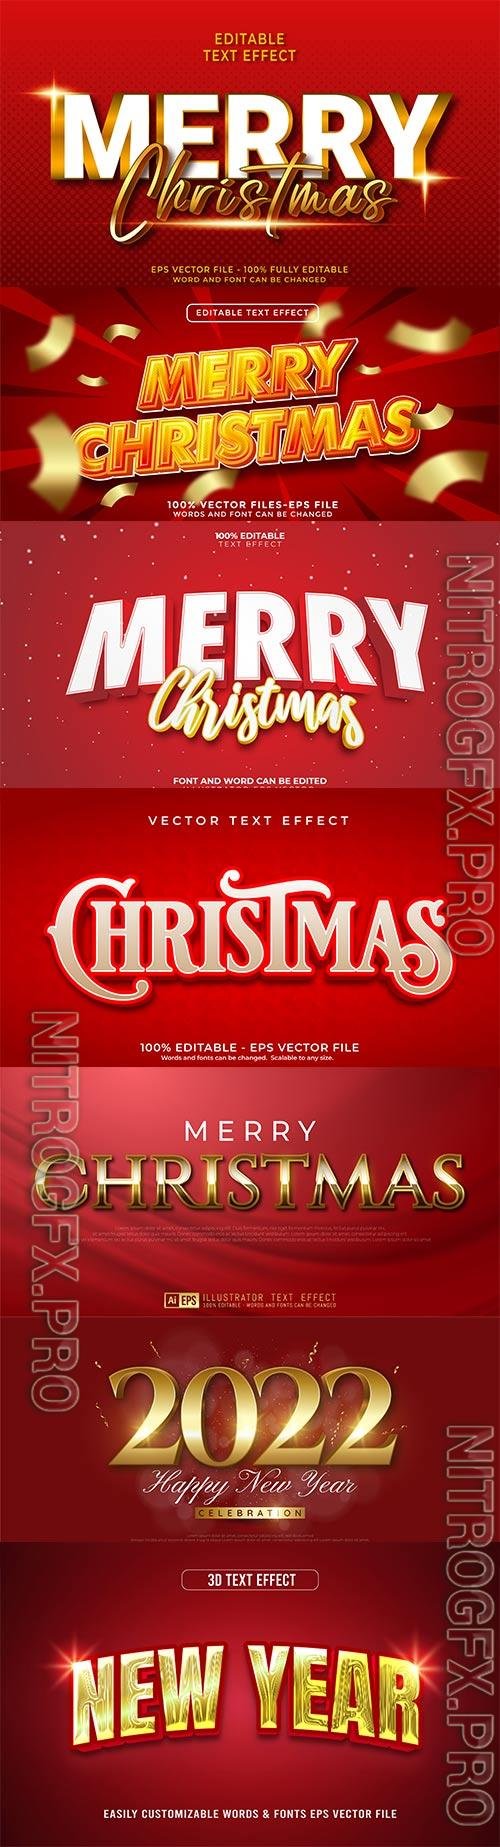 2022 New year and christmas editable text effect vector vol 21